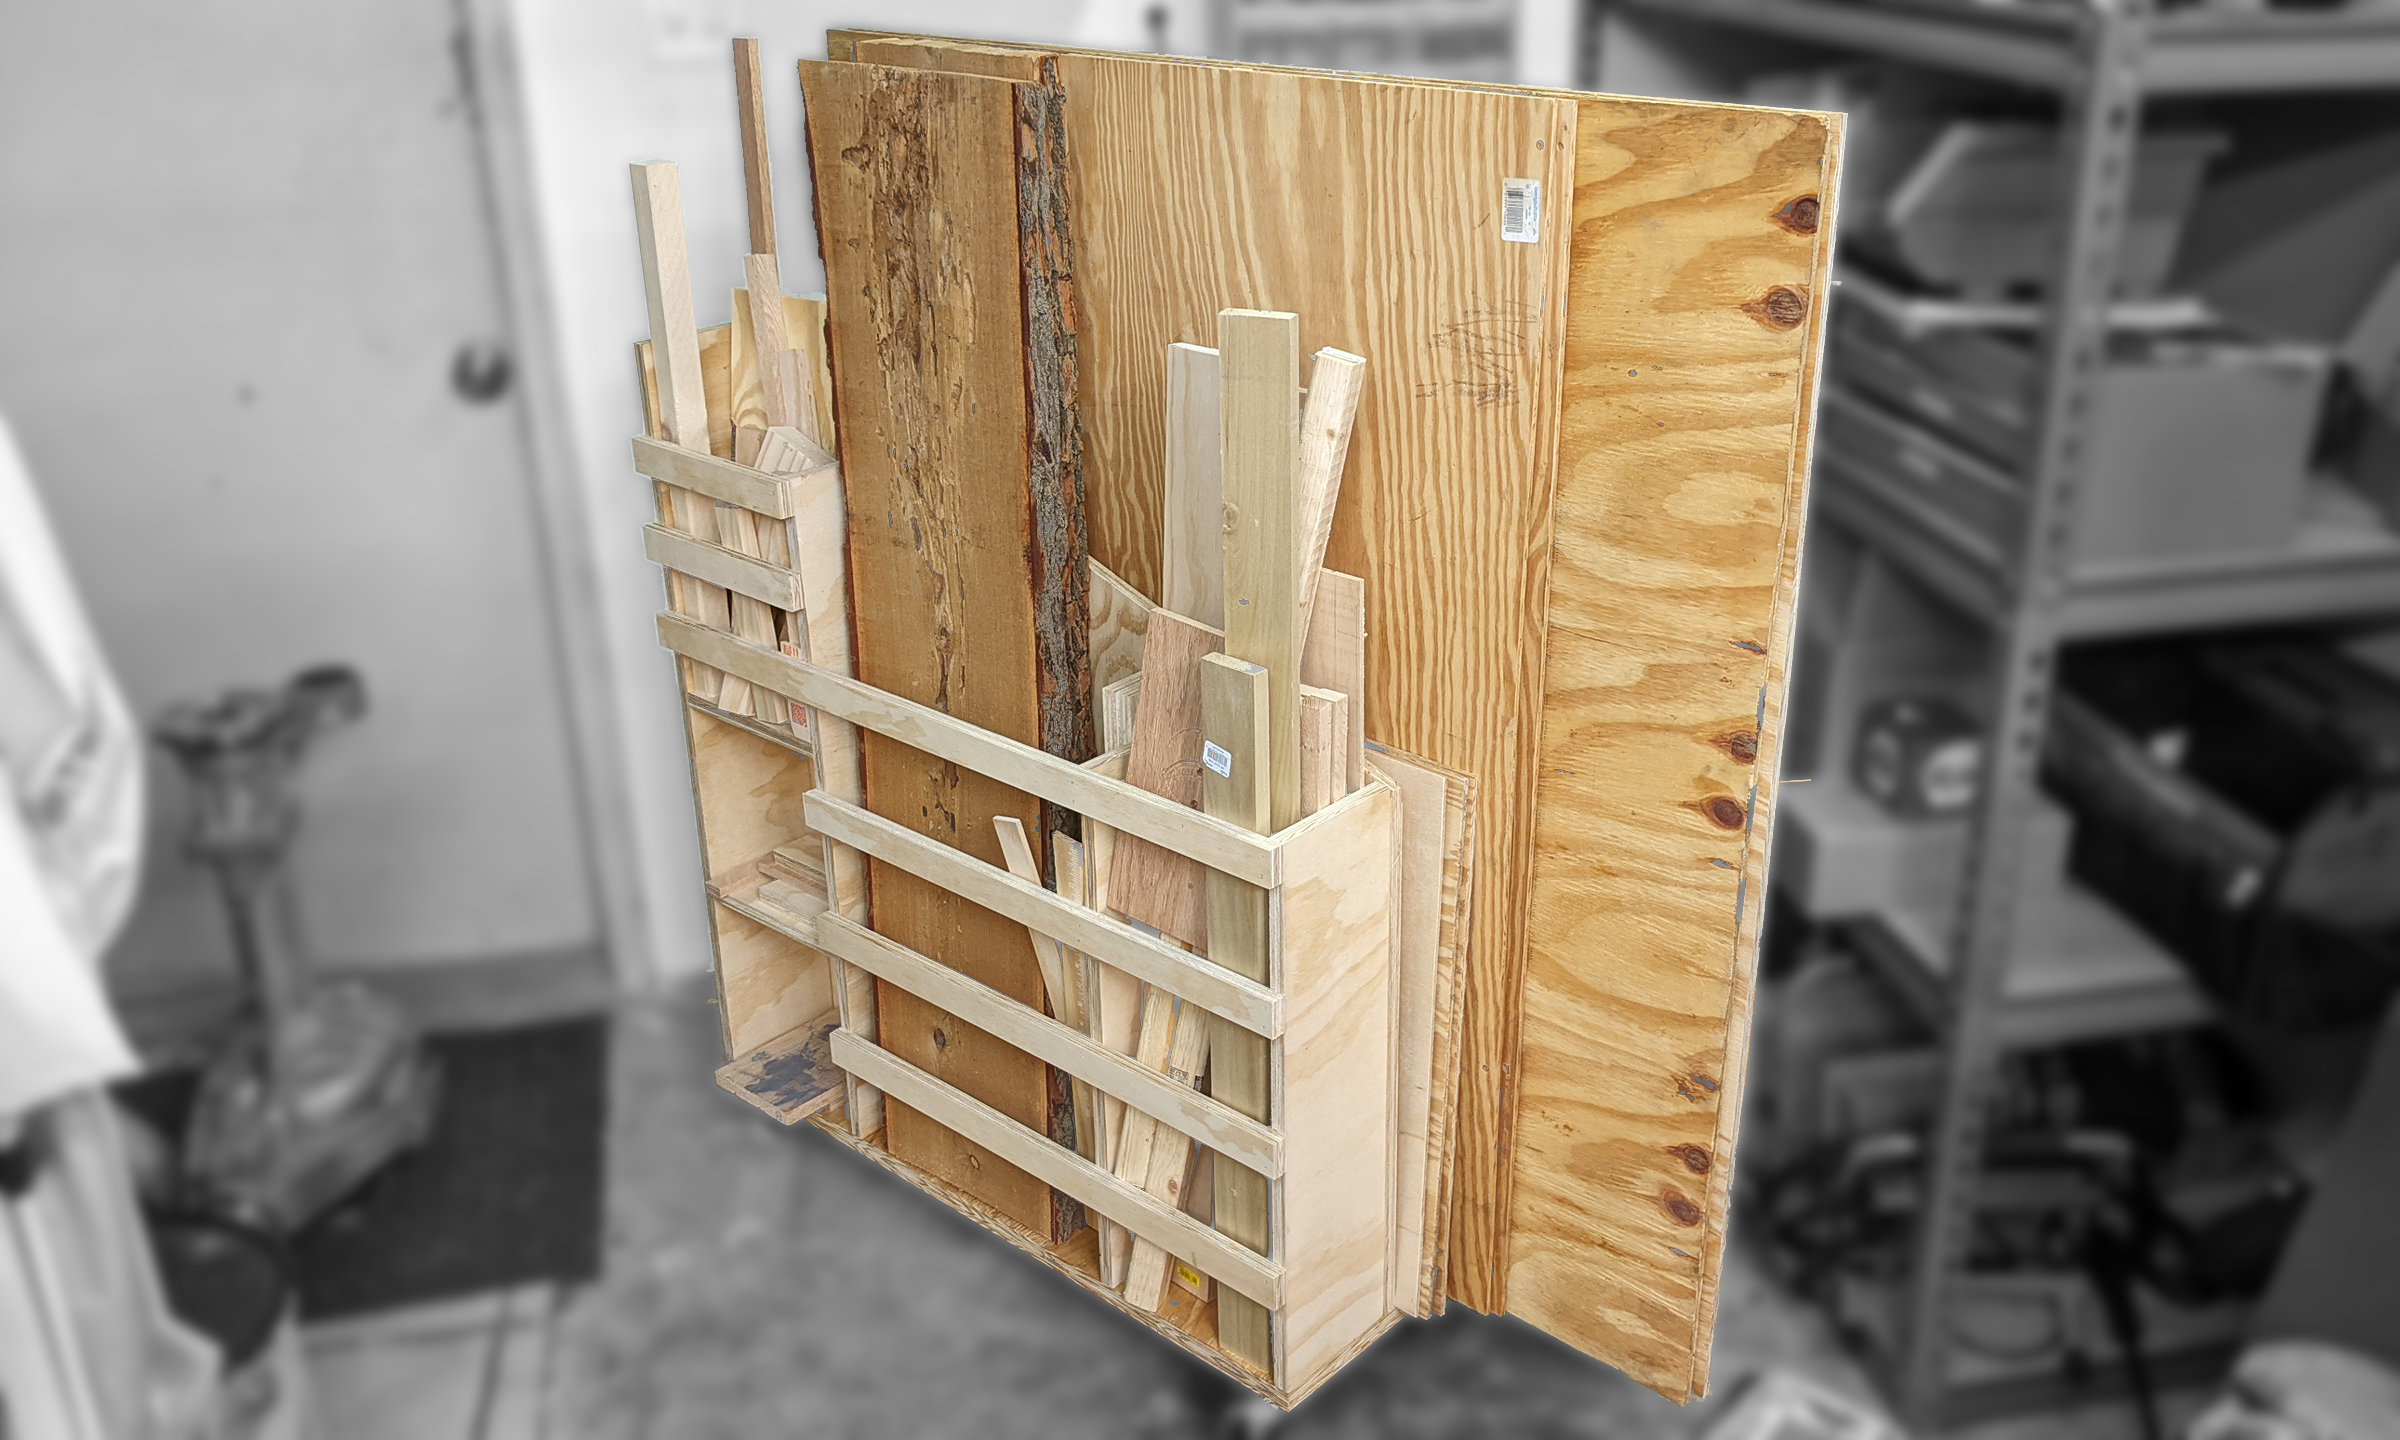 Learn how to DIY a wooden produce storage rack for $10 - If Only April